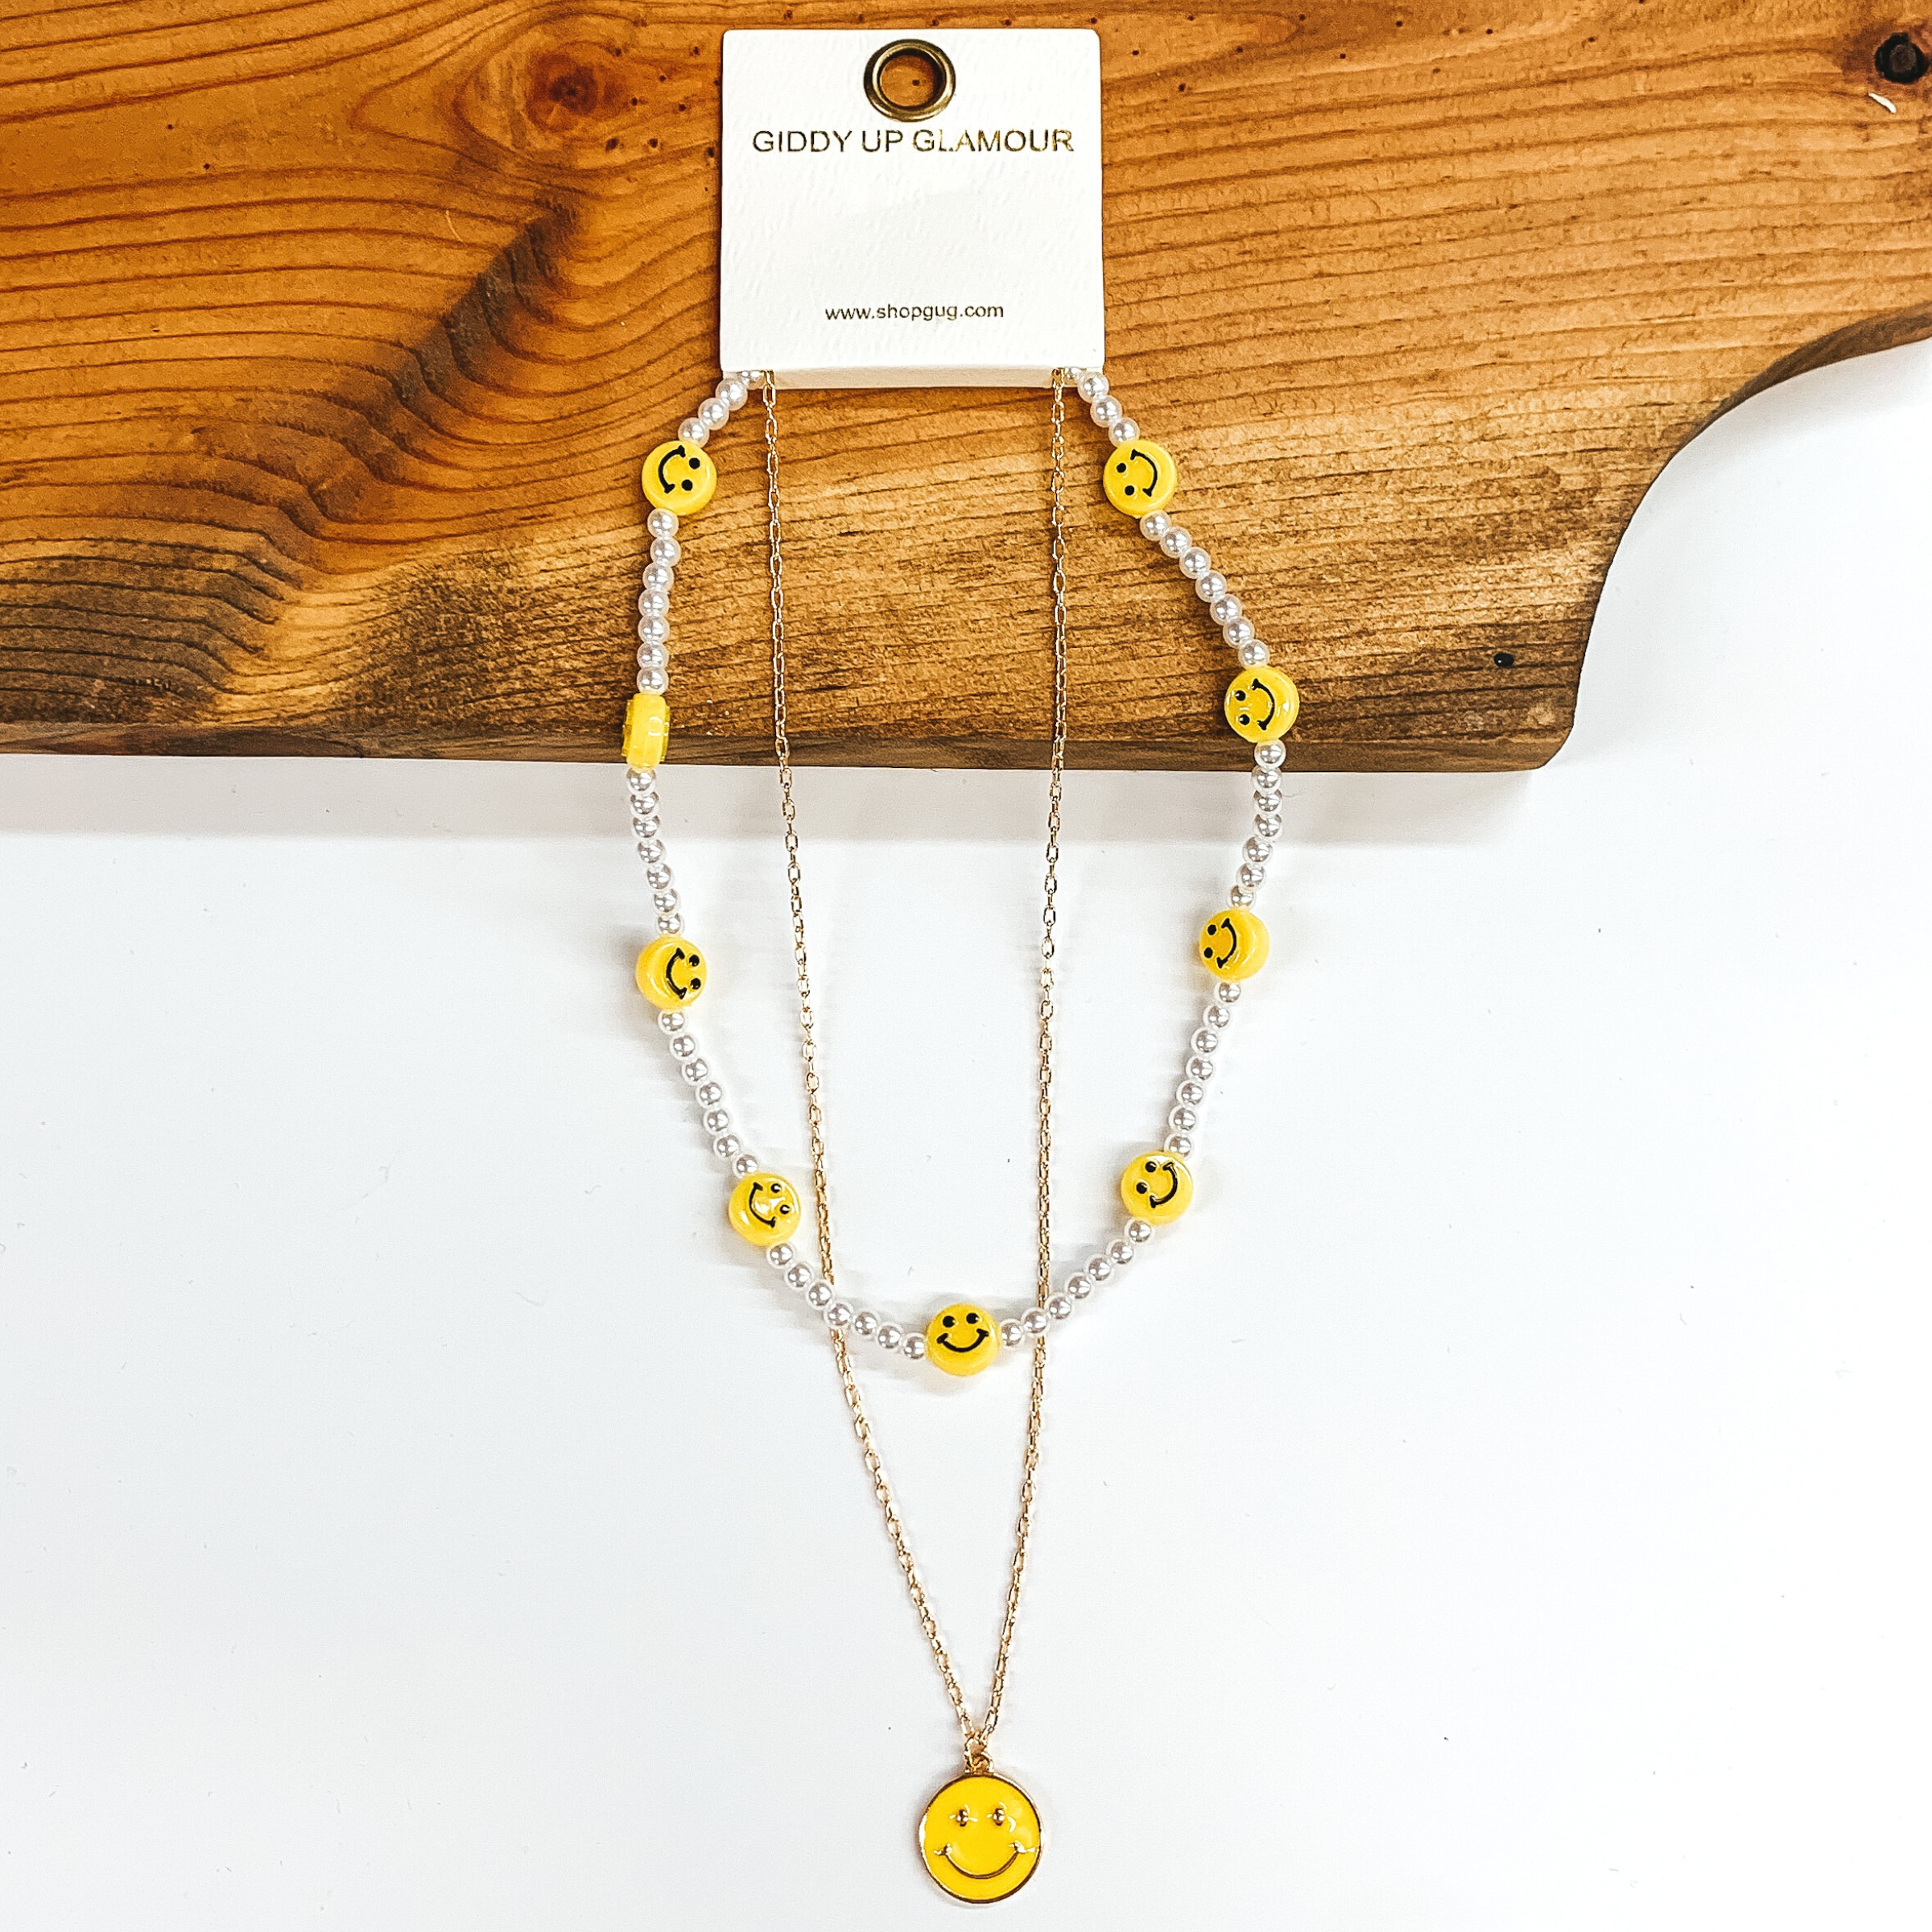 Double Layered White Beaded and Chain Necklace with Happy Face Pendant in Yellow - Giddy Up Glamour Boutique